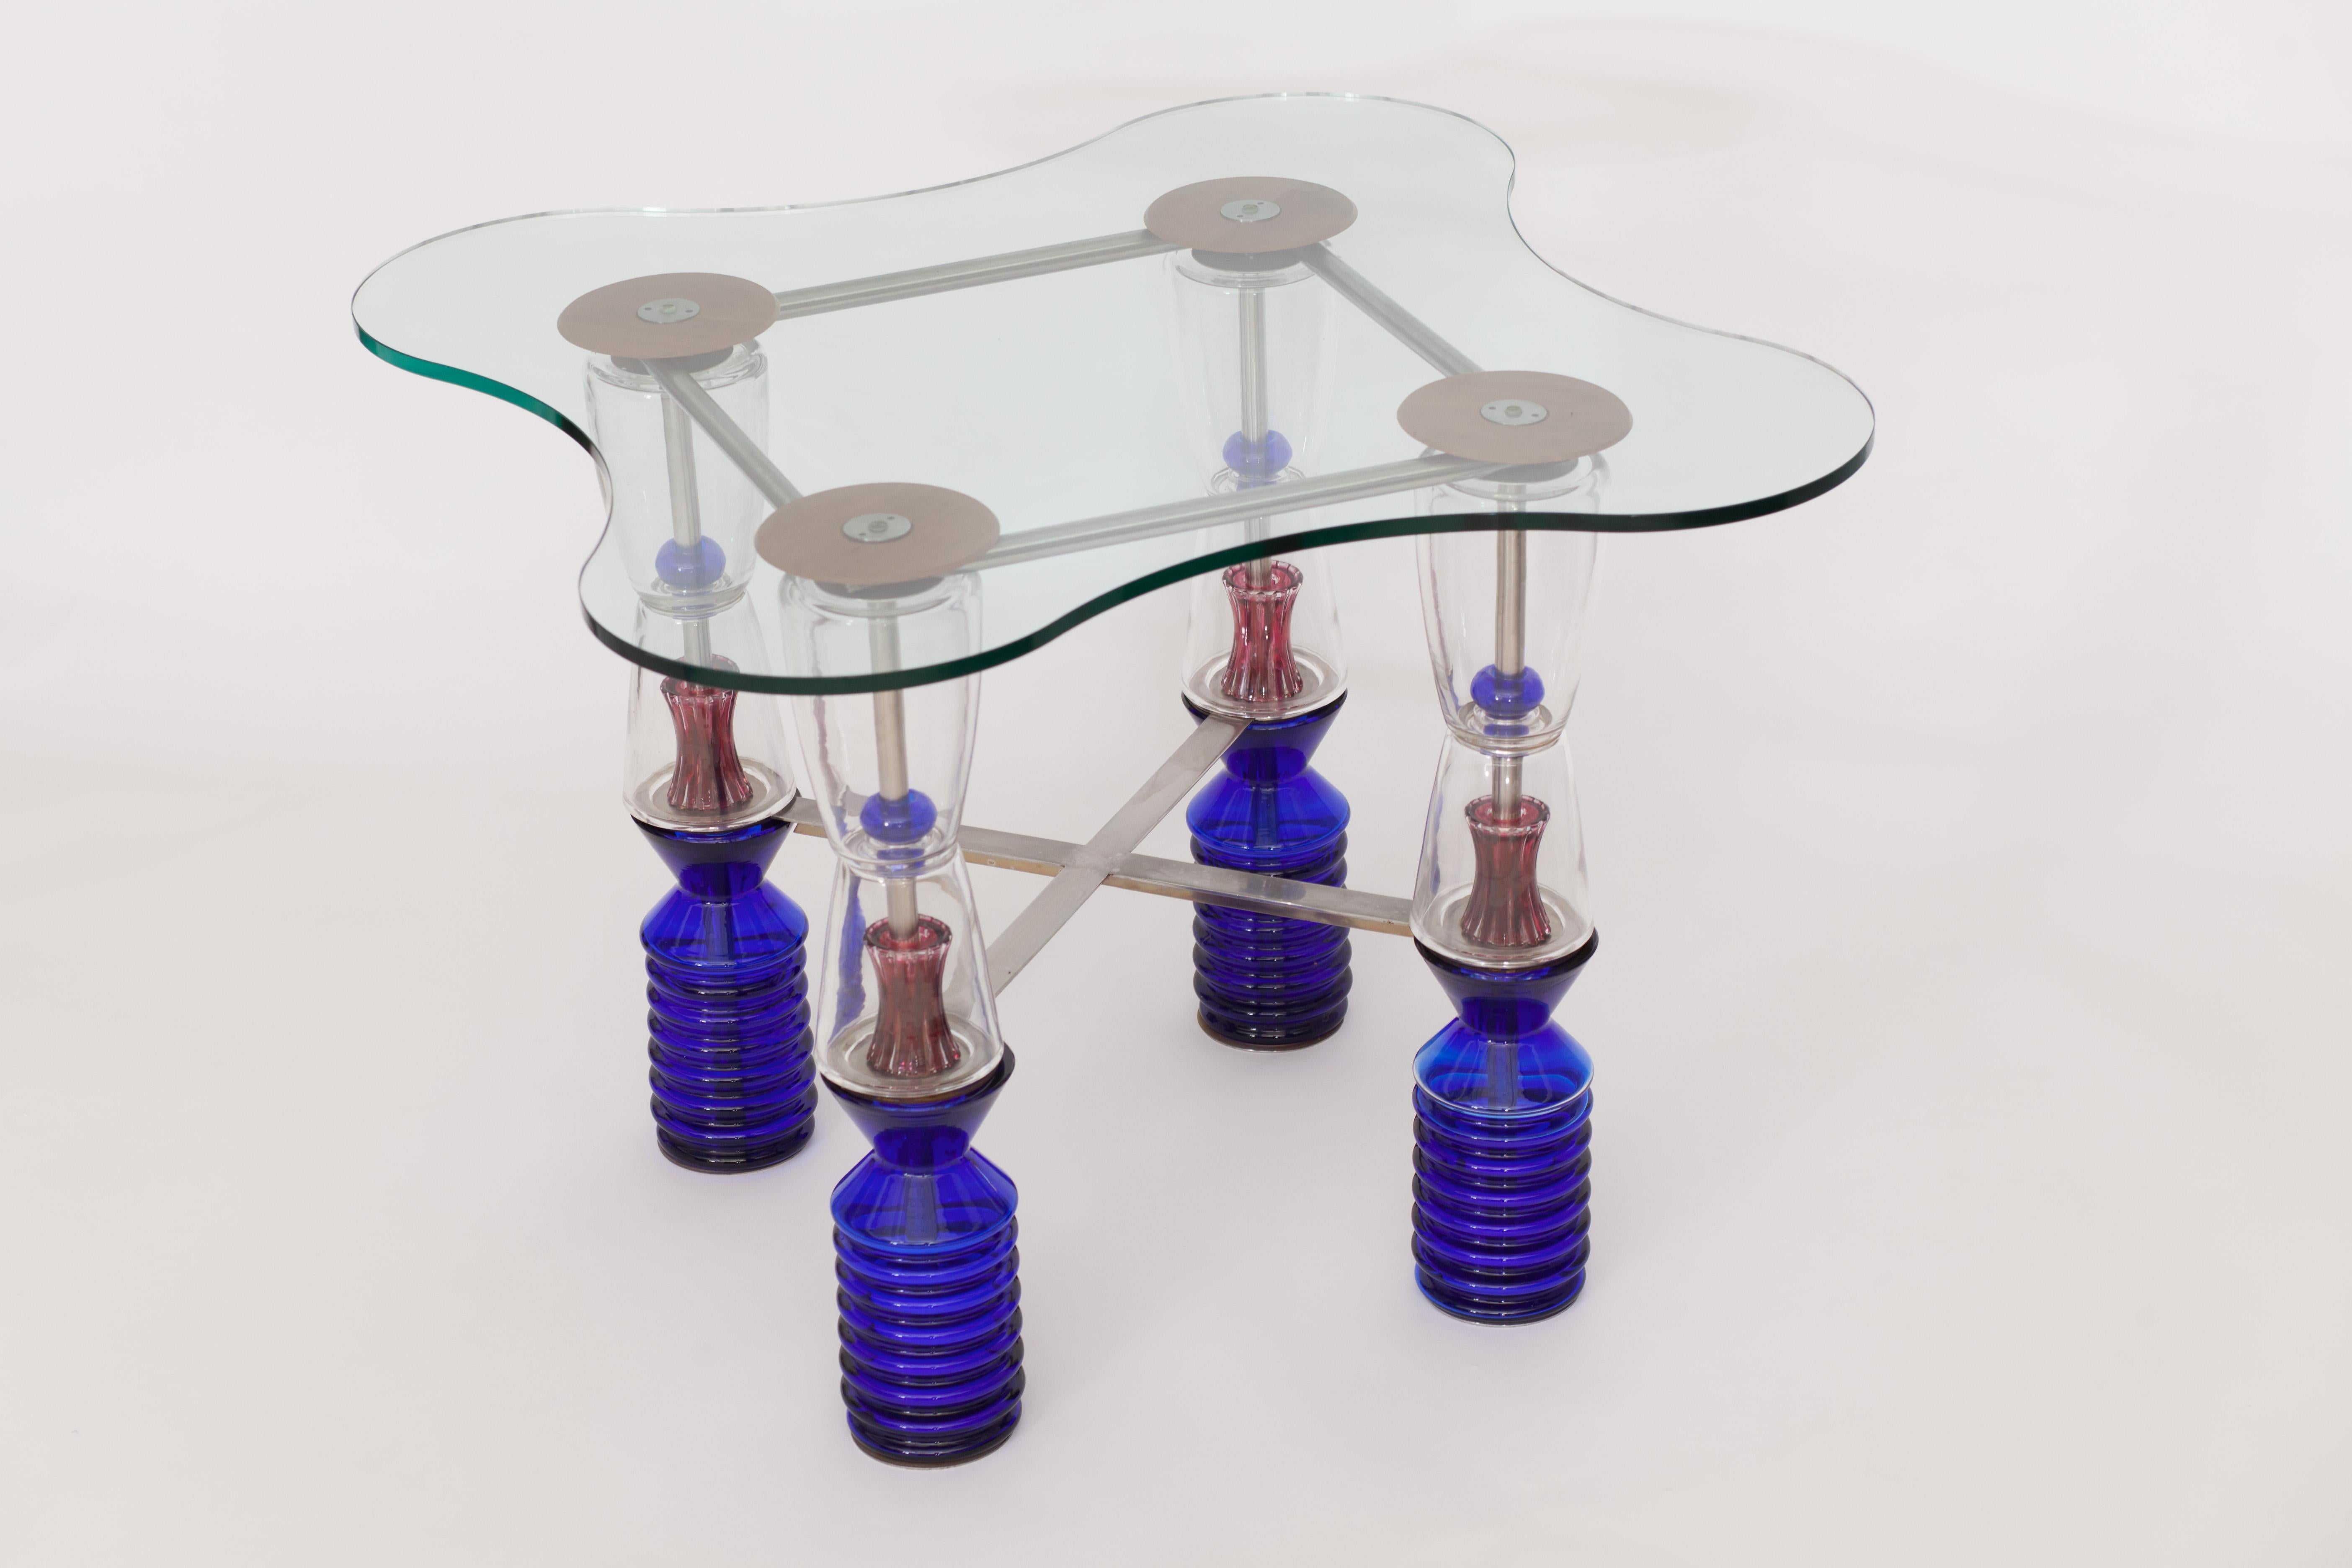 Van Praet & Val Saint lambert One-of-a-Kind crystal gaming table

This extraordinary side table, characterized by its geometric and organic shapes and well-considered use of color, is created by Frans Van Praet in the 1990s. A rare item that was